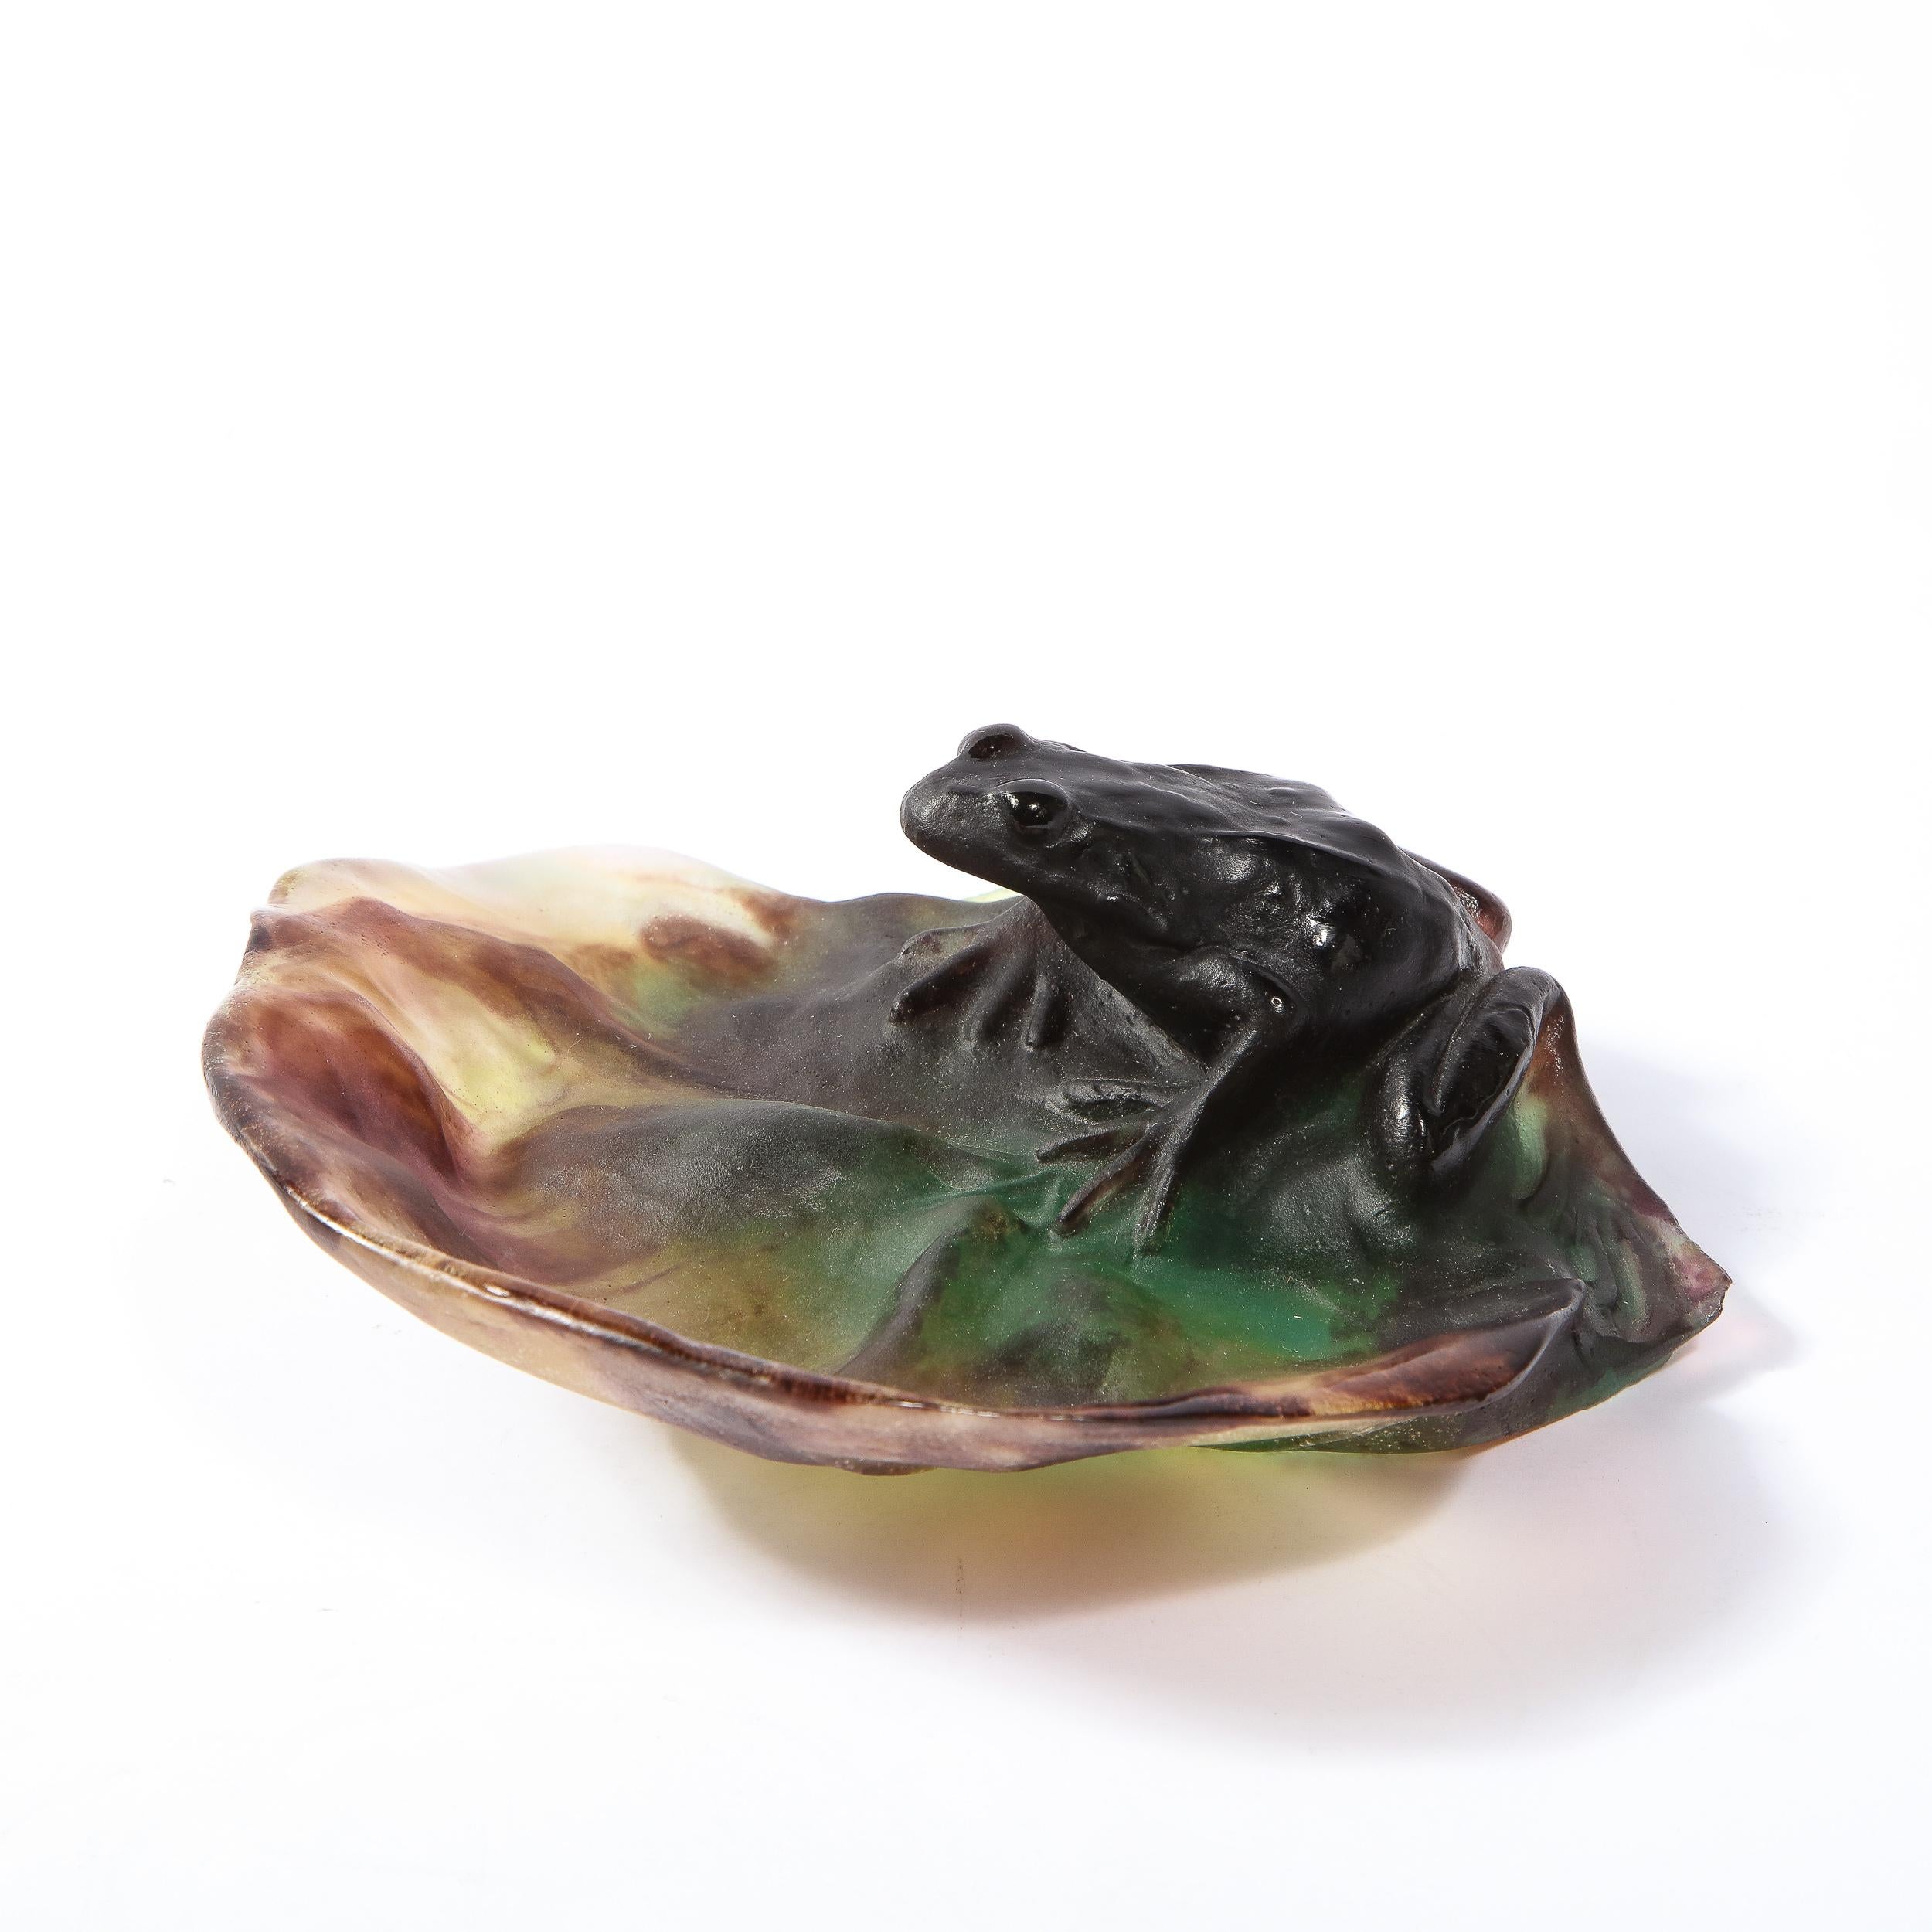 This beautiful Patte De Verre sculptural Art Glass decorative stylized frog dish was realized by the atelier of the acclaimed Daum brothers in the latter half of the 20th century. The Daum Brothers worked in Nancy France during the the late 19th and